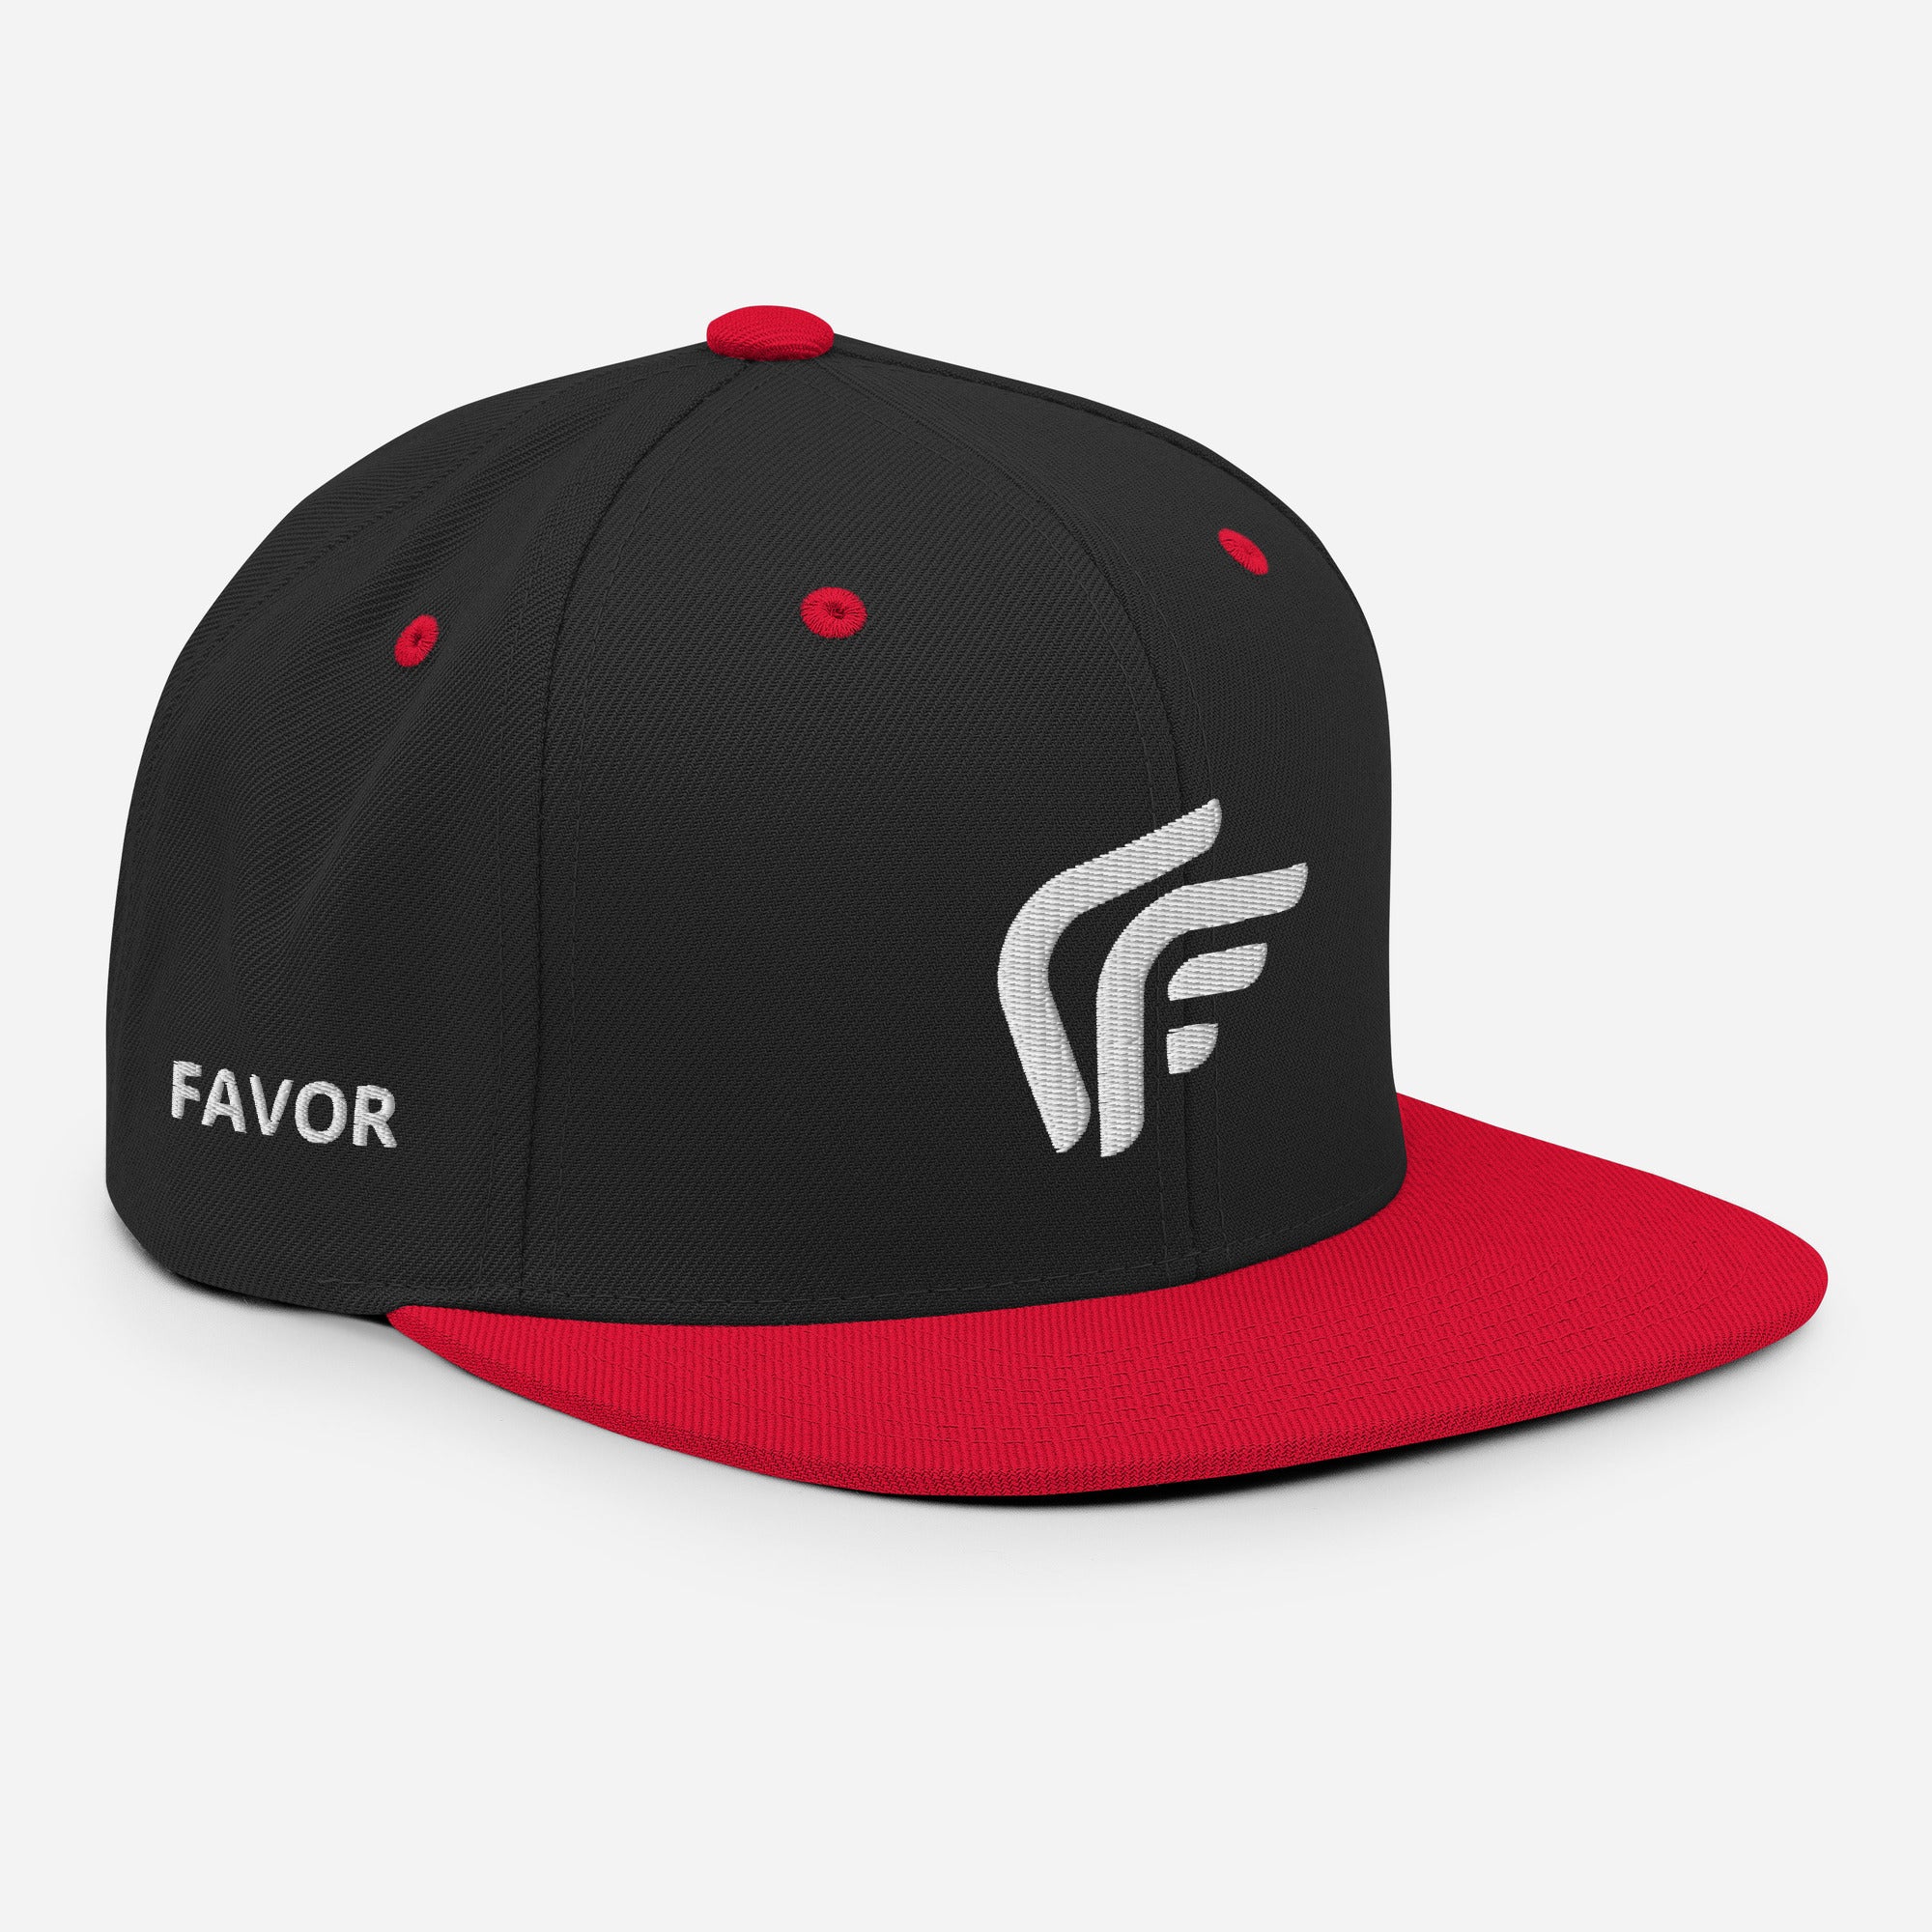 Favored Logo Snapback Hat, Used By God, Used By God Clothing, Christian Apparel, Christian Hats, Christian T-Shirts, Christian Clothing, God Shirts, Christian Sweatshirts, God Clothing, Jesus Hoodie, Jesus Clothes, God Is Dope, Art Of Homage, Red Letter Clothing, Elevated Faith, Active Faith Sports, Beacon Threads, God The Father Apparel